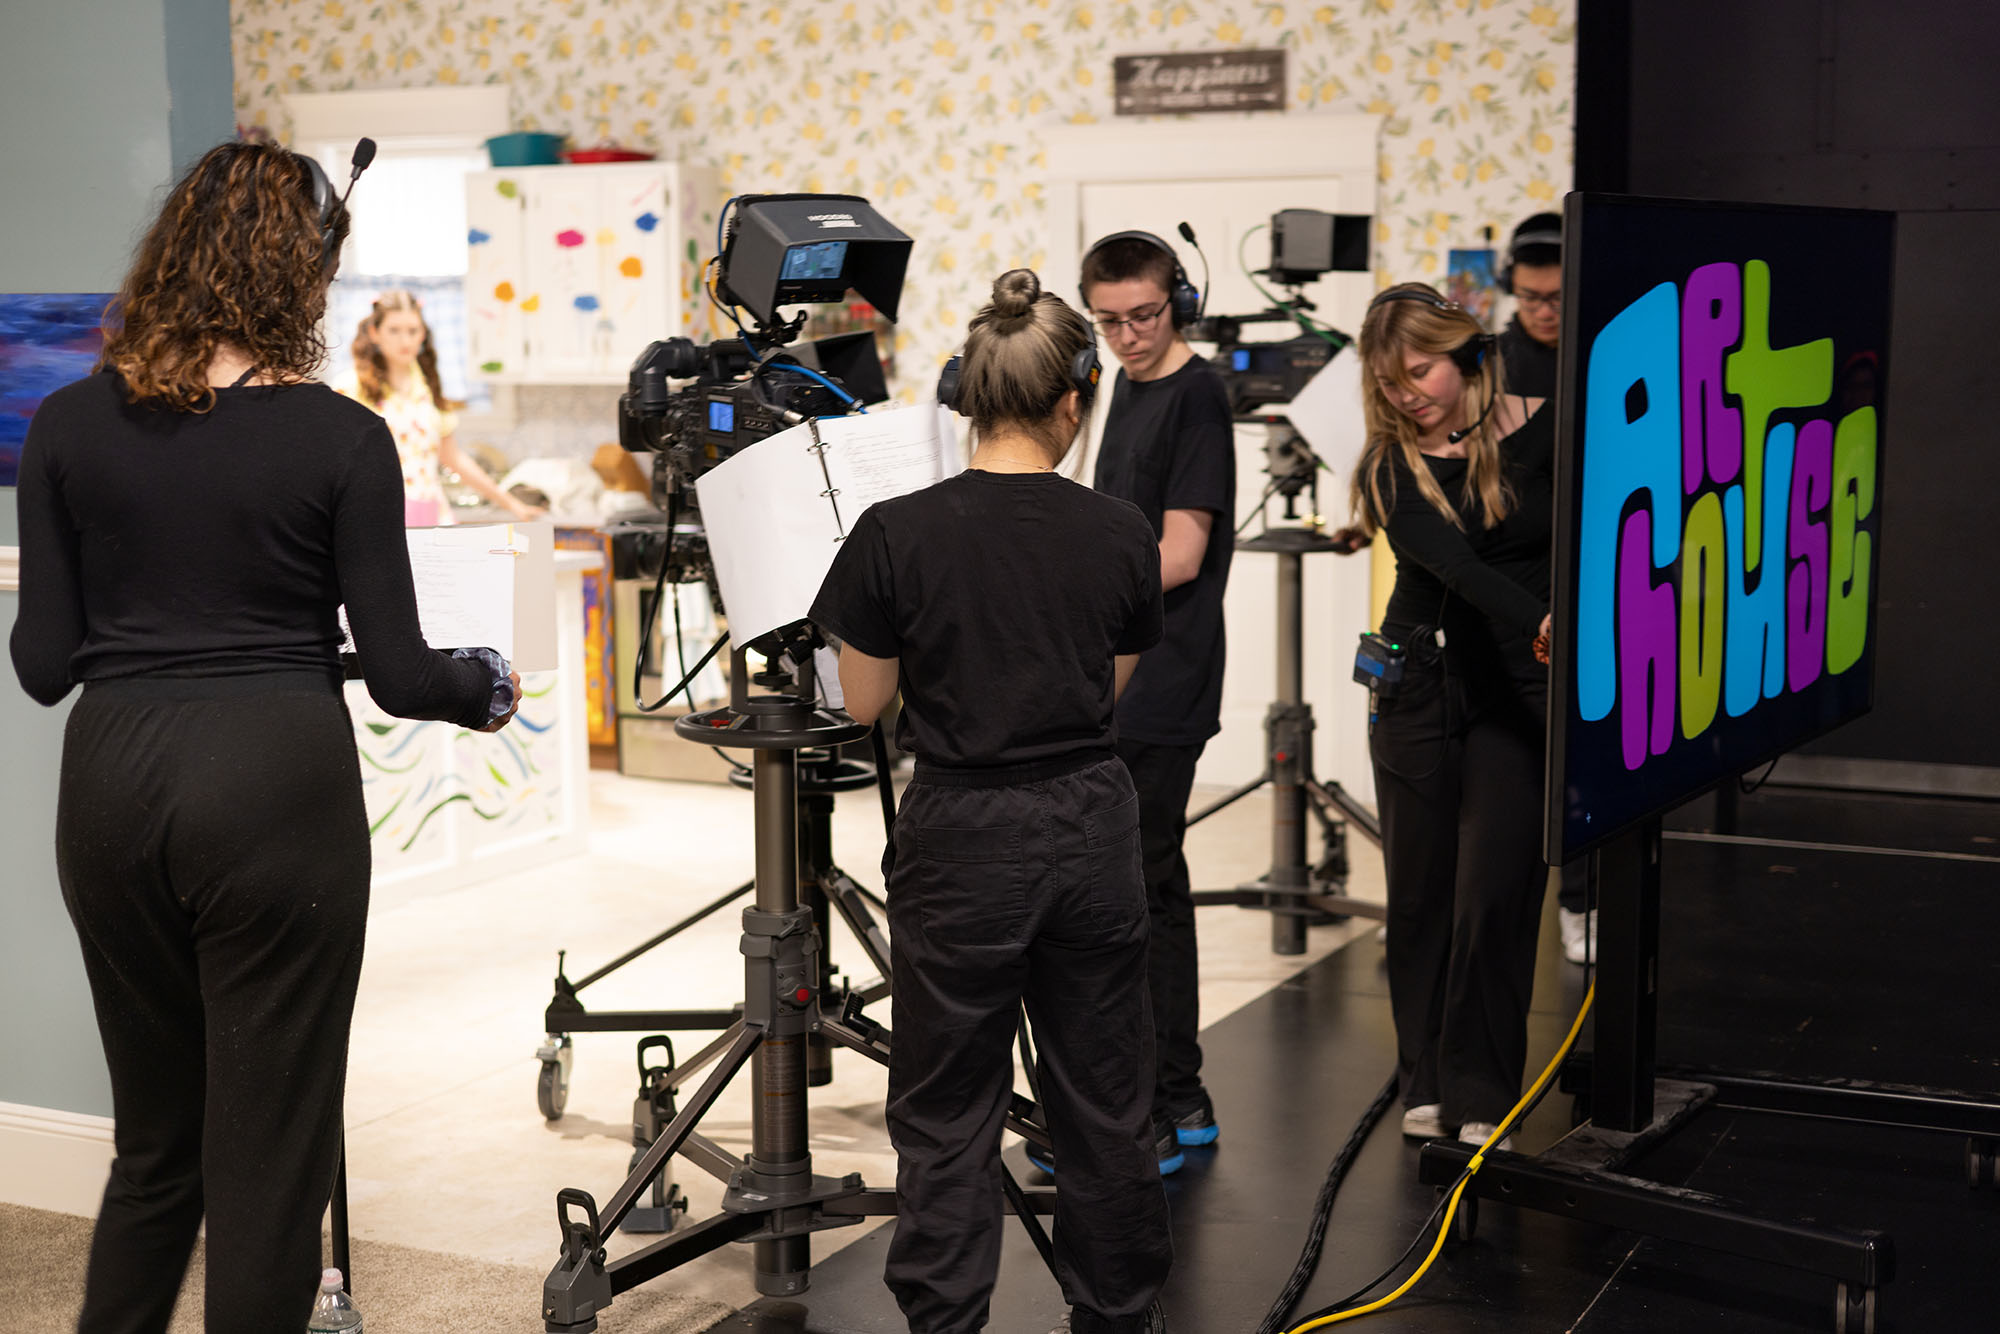 Photo: People wander and set up cameras and other lighting and recording equipment on the set of Art House. The various crew members wear all black outfits as they work and collaborate on the brightly lit, colorful set.